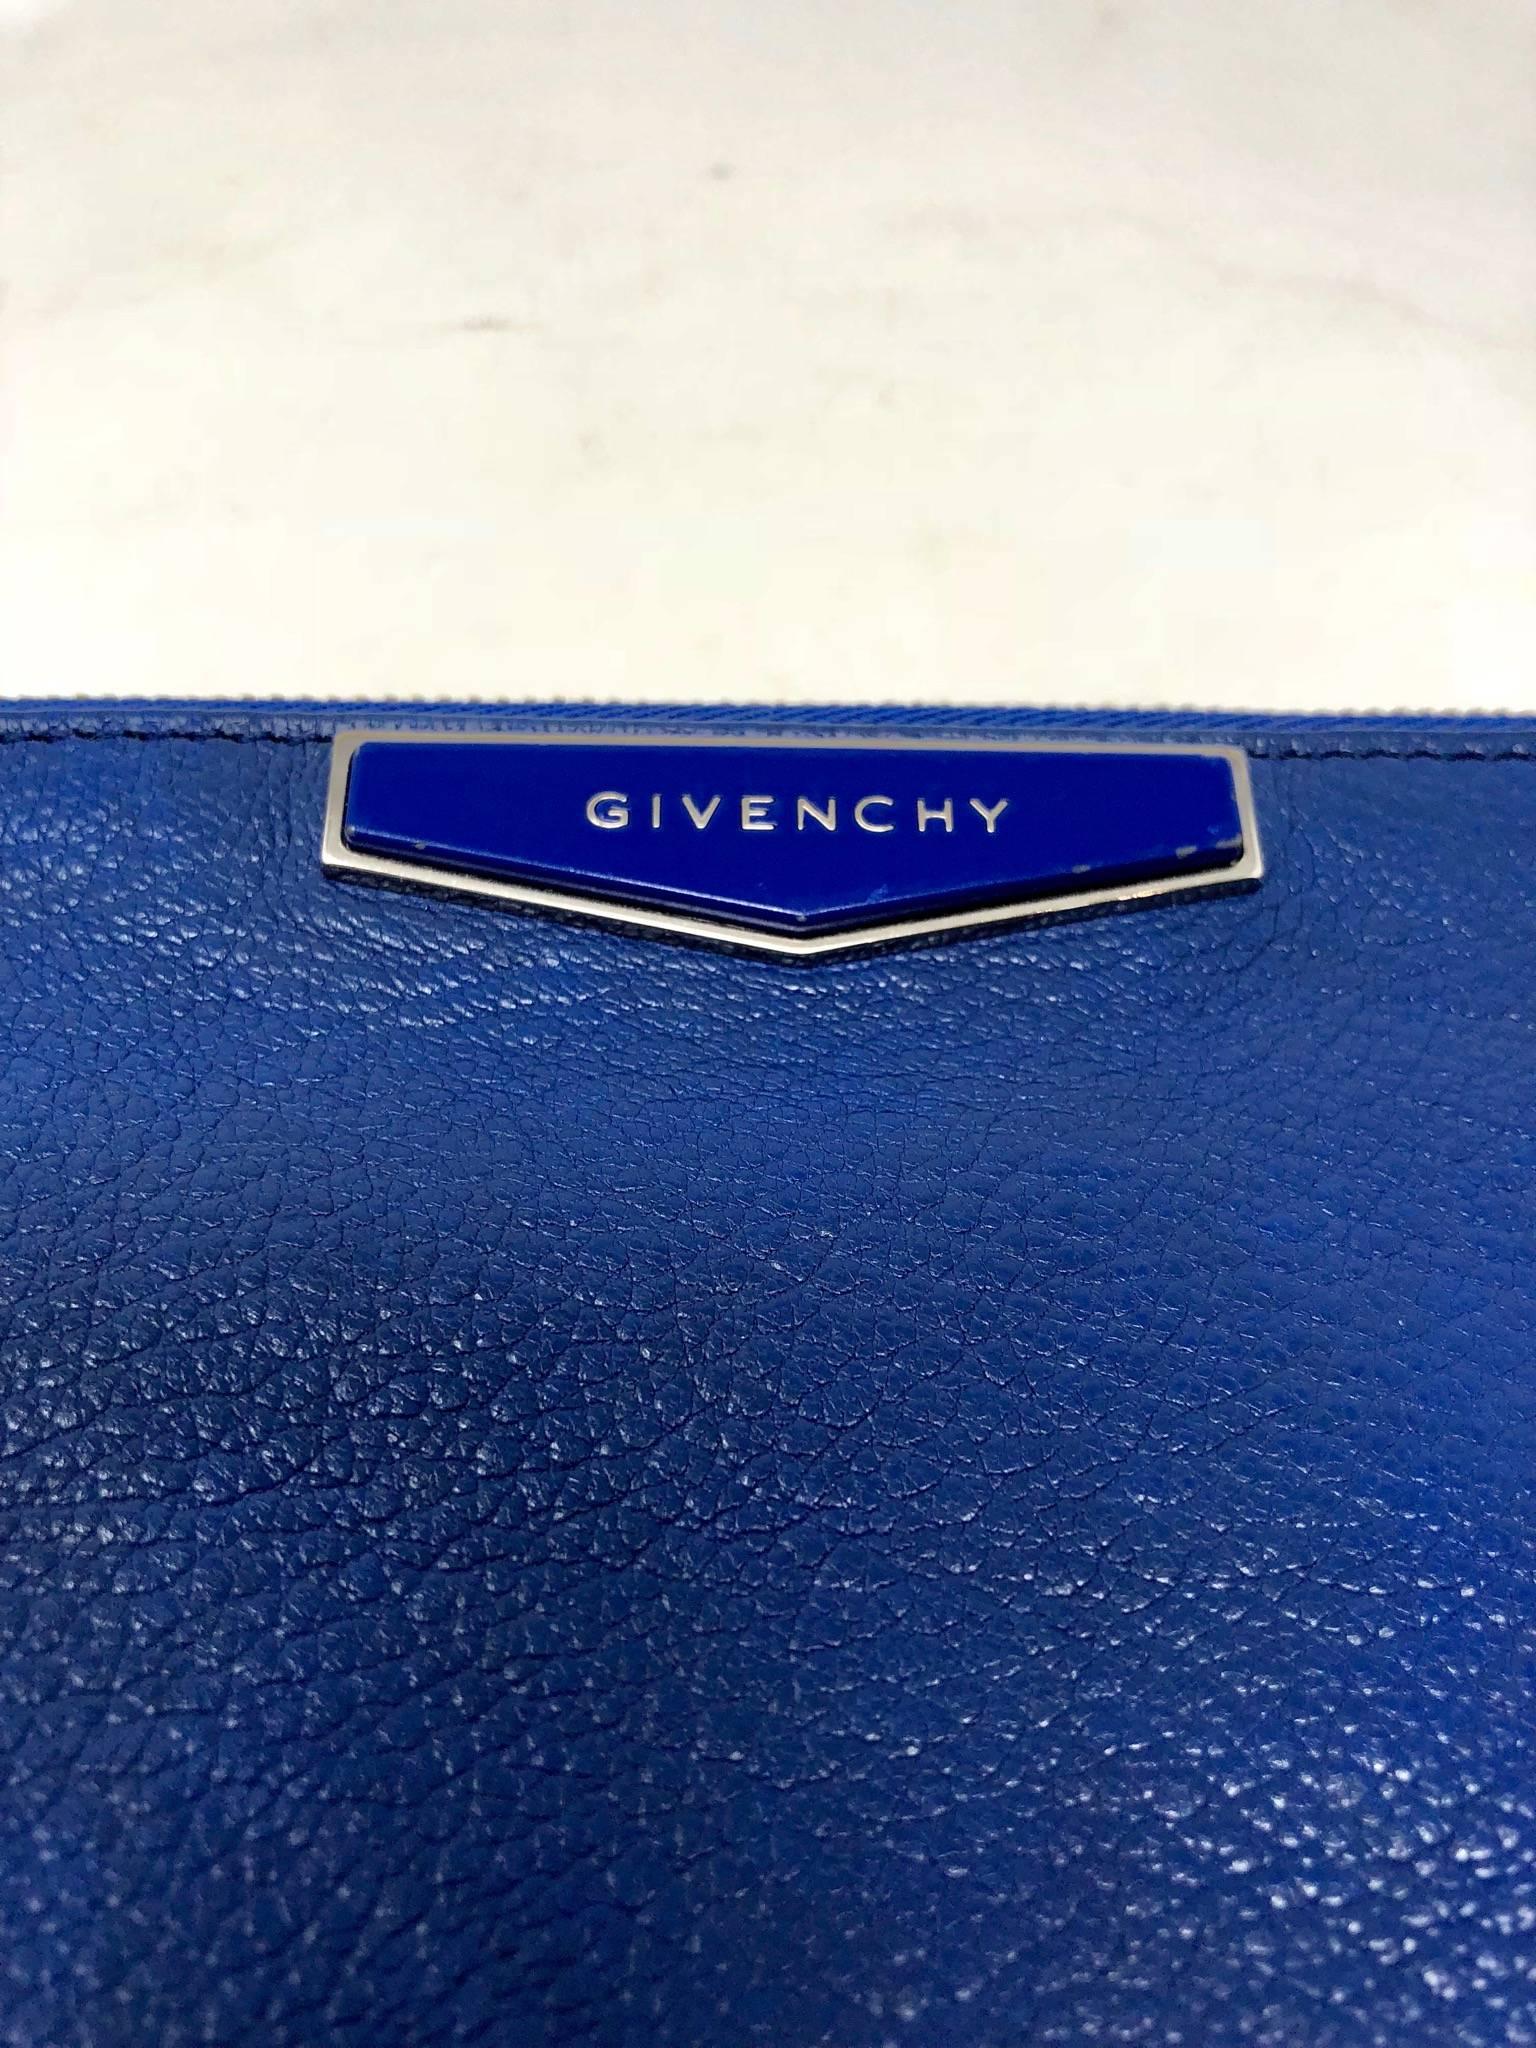 Givenchy blue pouch/ clutch for Ipad holder or fashion bag. Electric blue color.  Leather and silver accent.